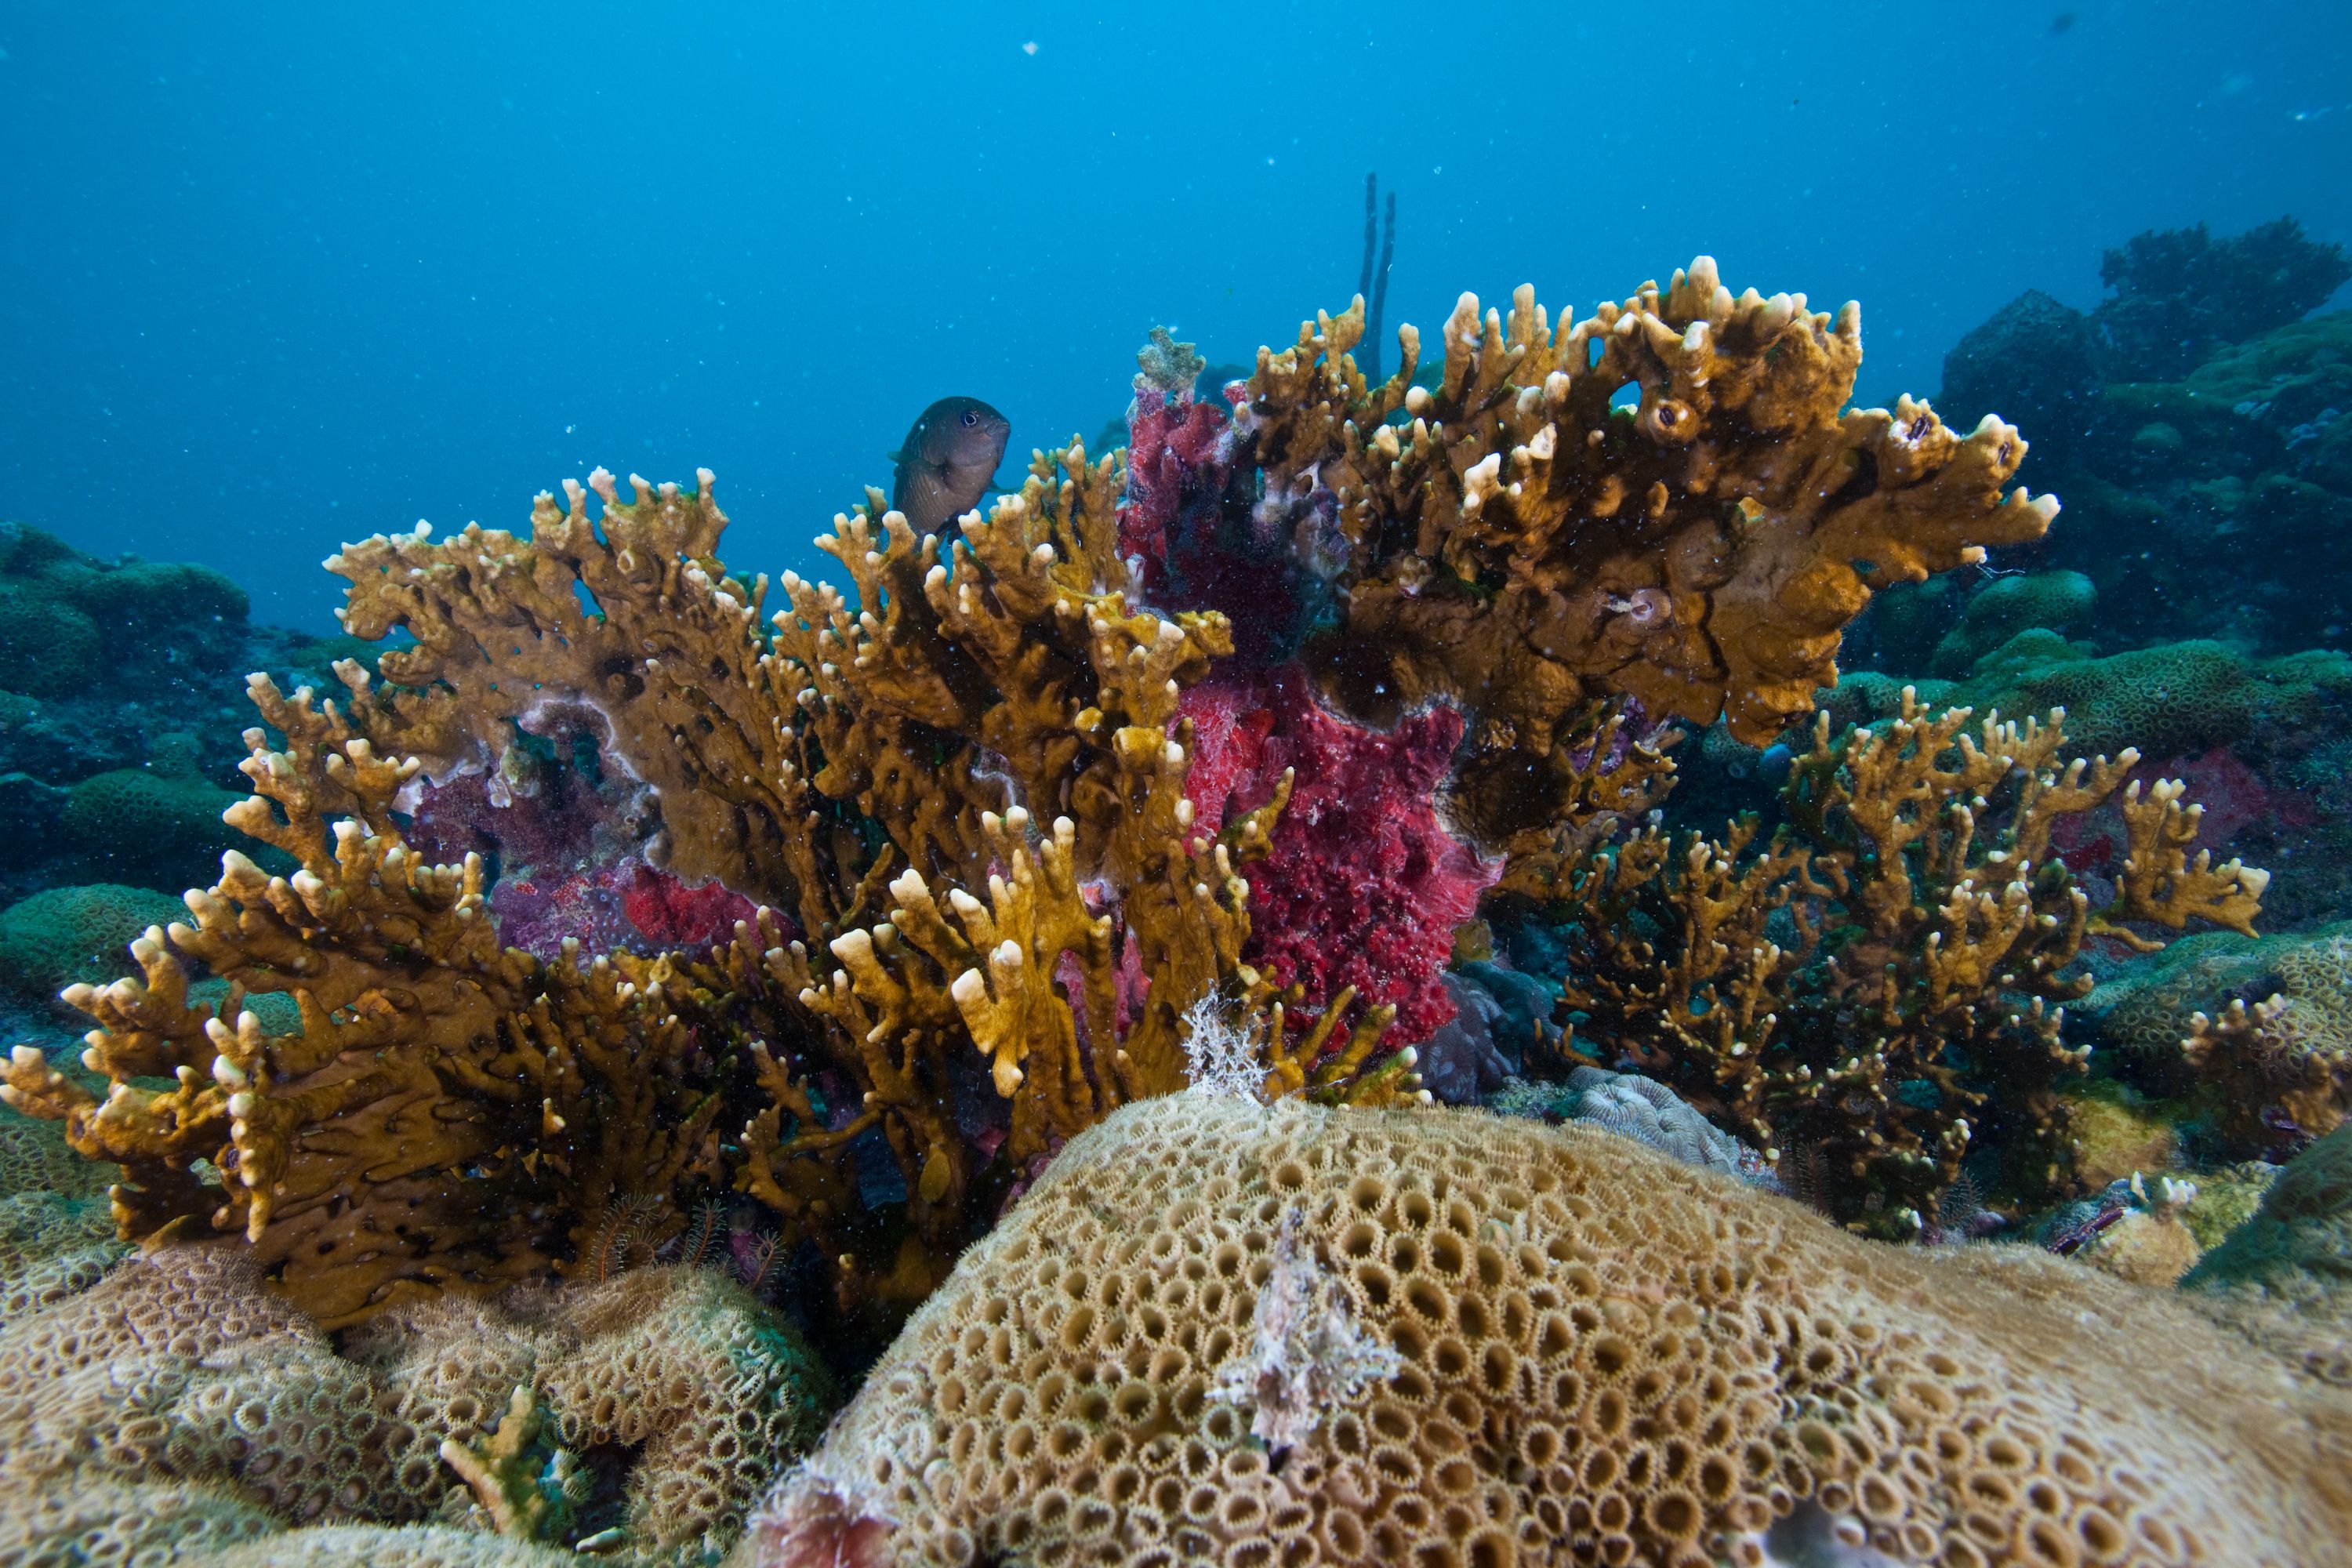 https://www.conservationleadershipprogramme.org/media/2014/12/ci_84127626_Coral_Abrolhos-National-Park-Brazil_Luciano-Candisani_backslash_iLCP.jpg